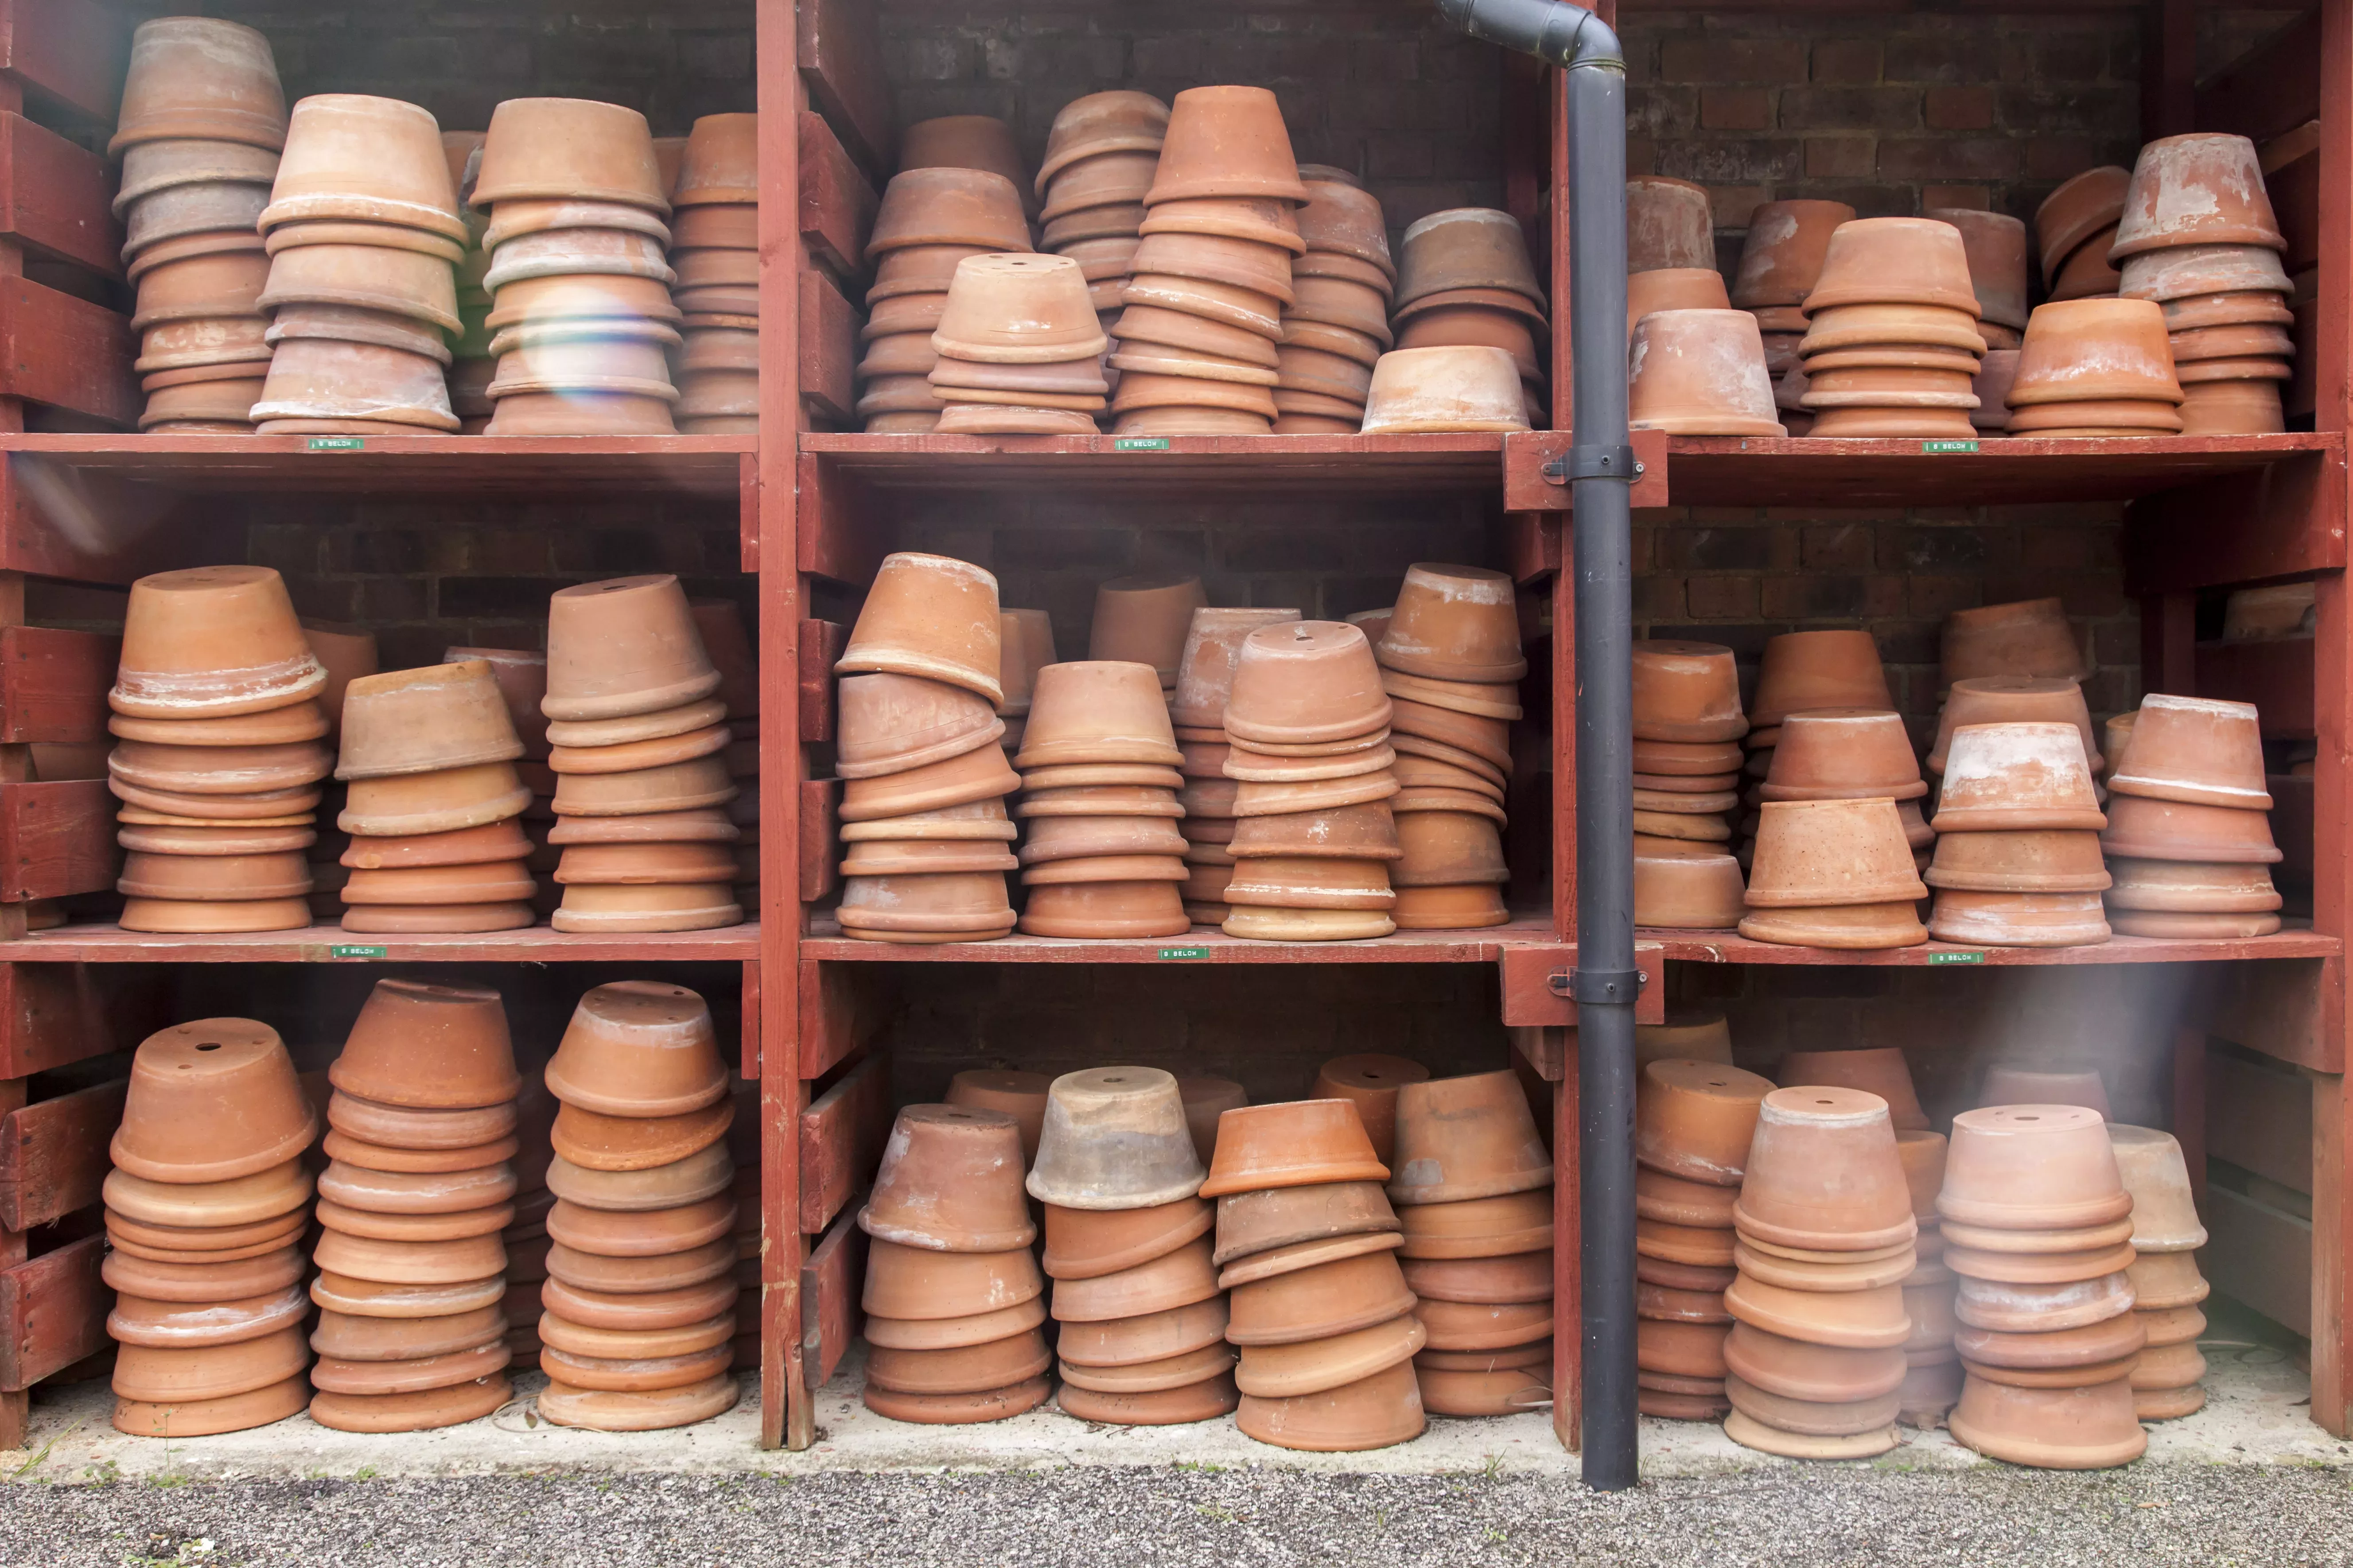 A large number of plant pots stacked on shelves